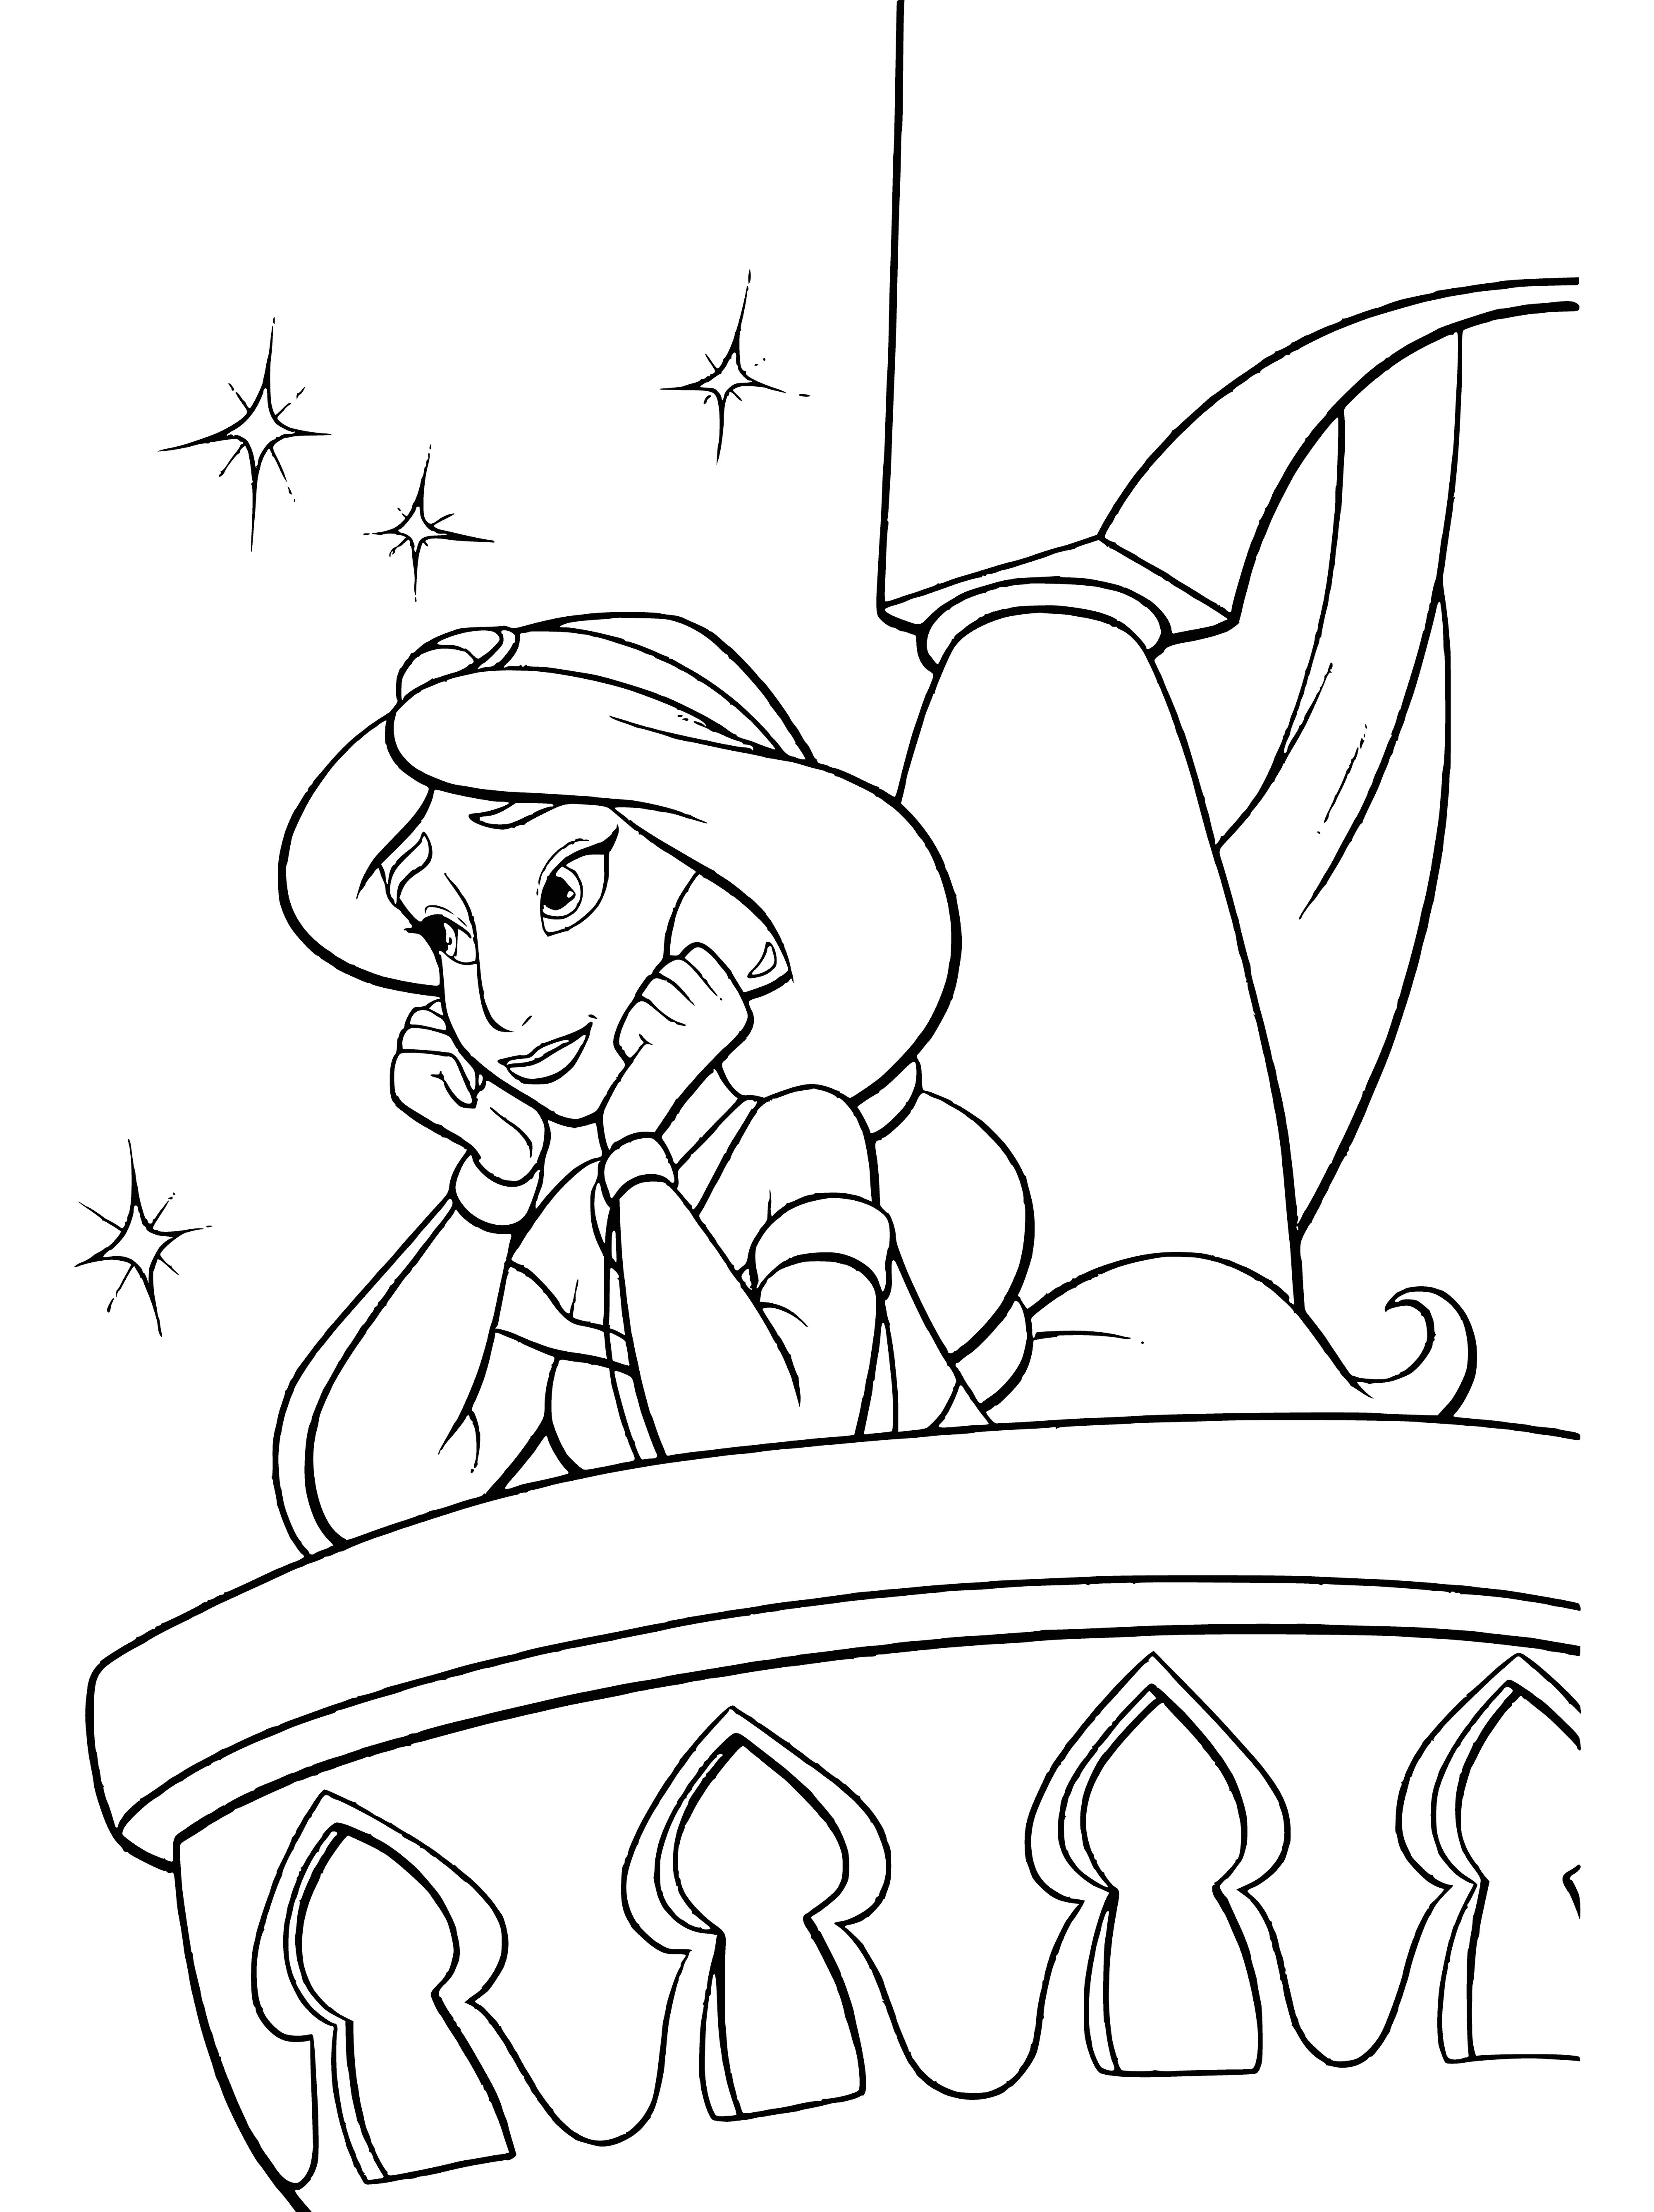 coloring page: Jasmine stands on a low balcony, wearing a purple dress with gold accents, admiring a cityscape of colourful buildings and domes in the background.